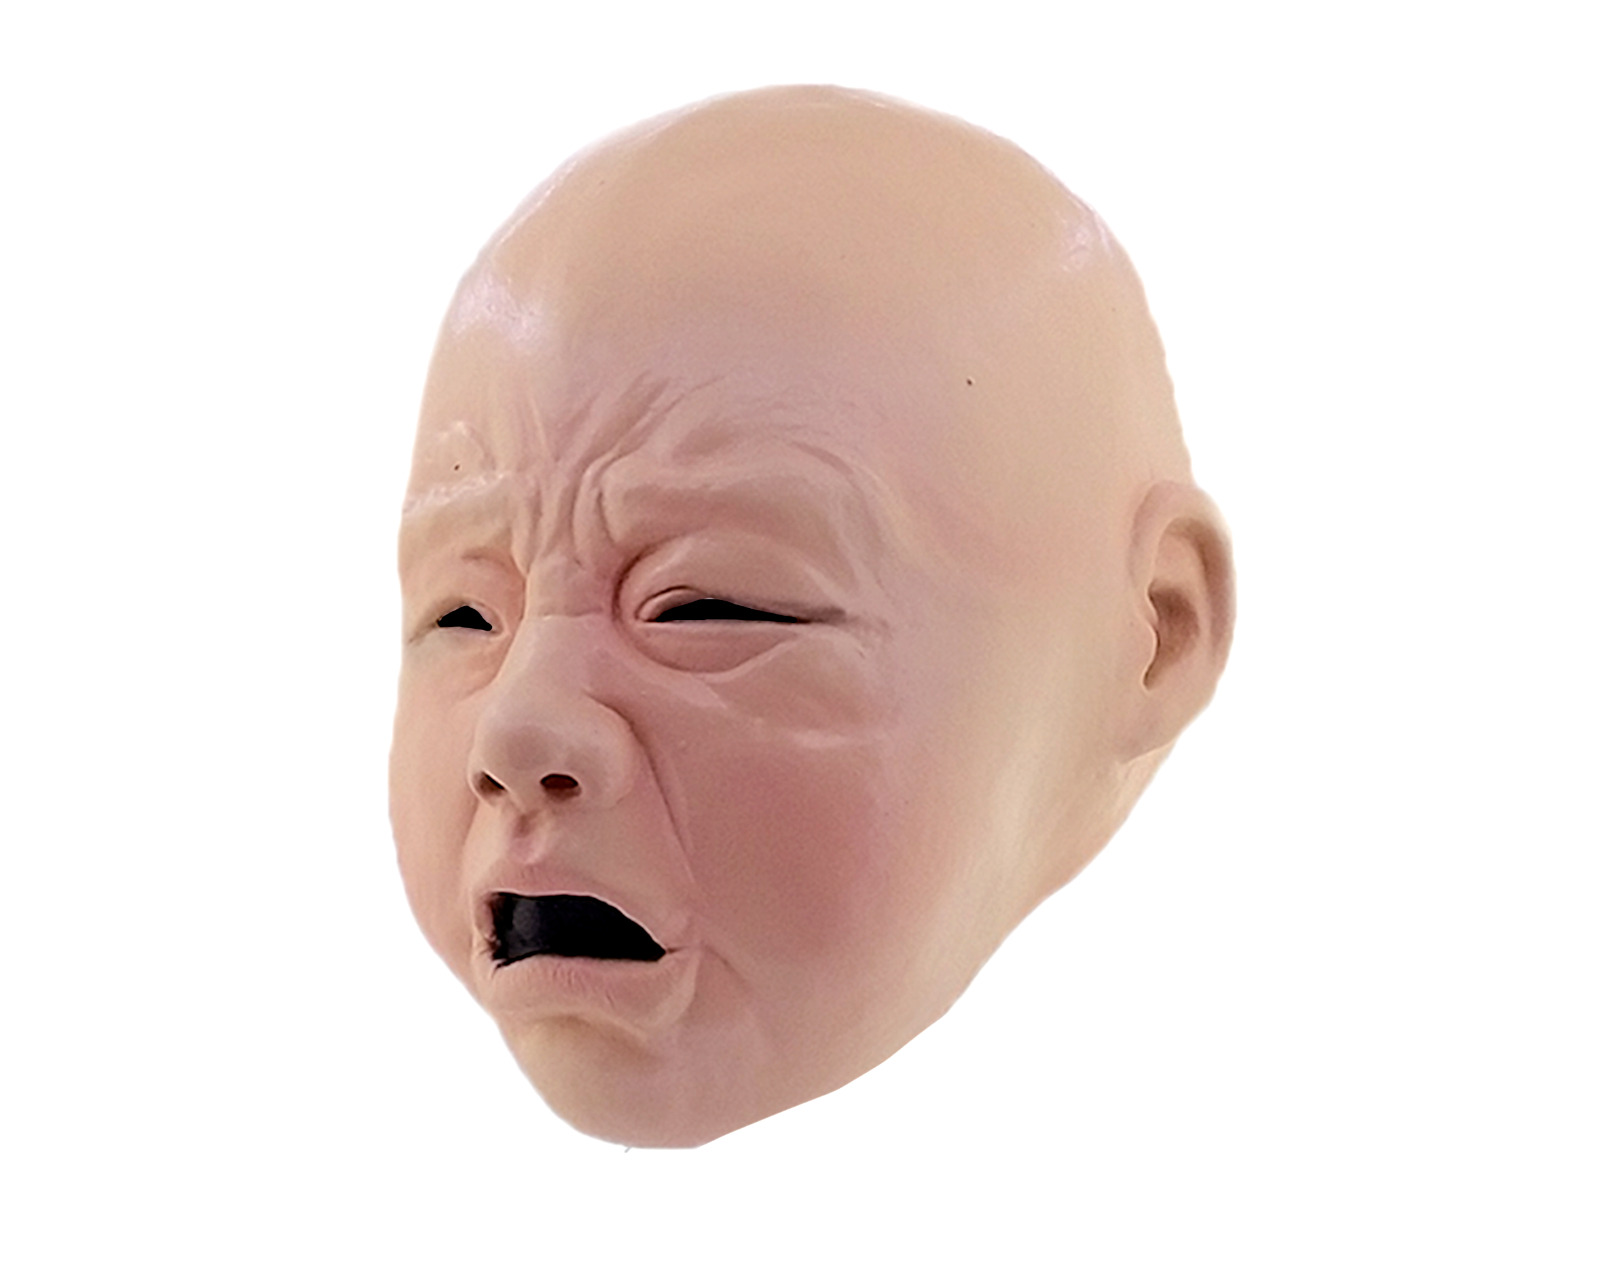 Latex Mask Crying Baby Halloween Cosplay Latex Mask by Ghoulish Productions